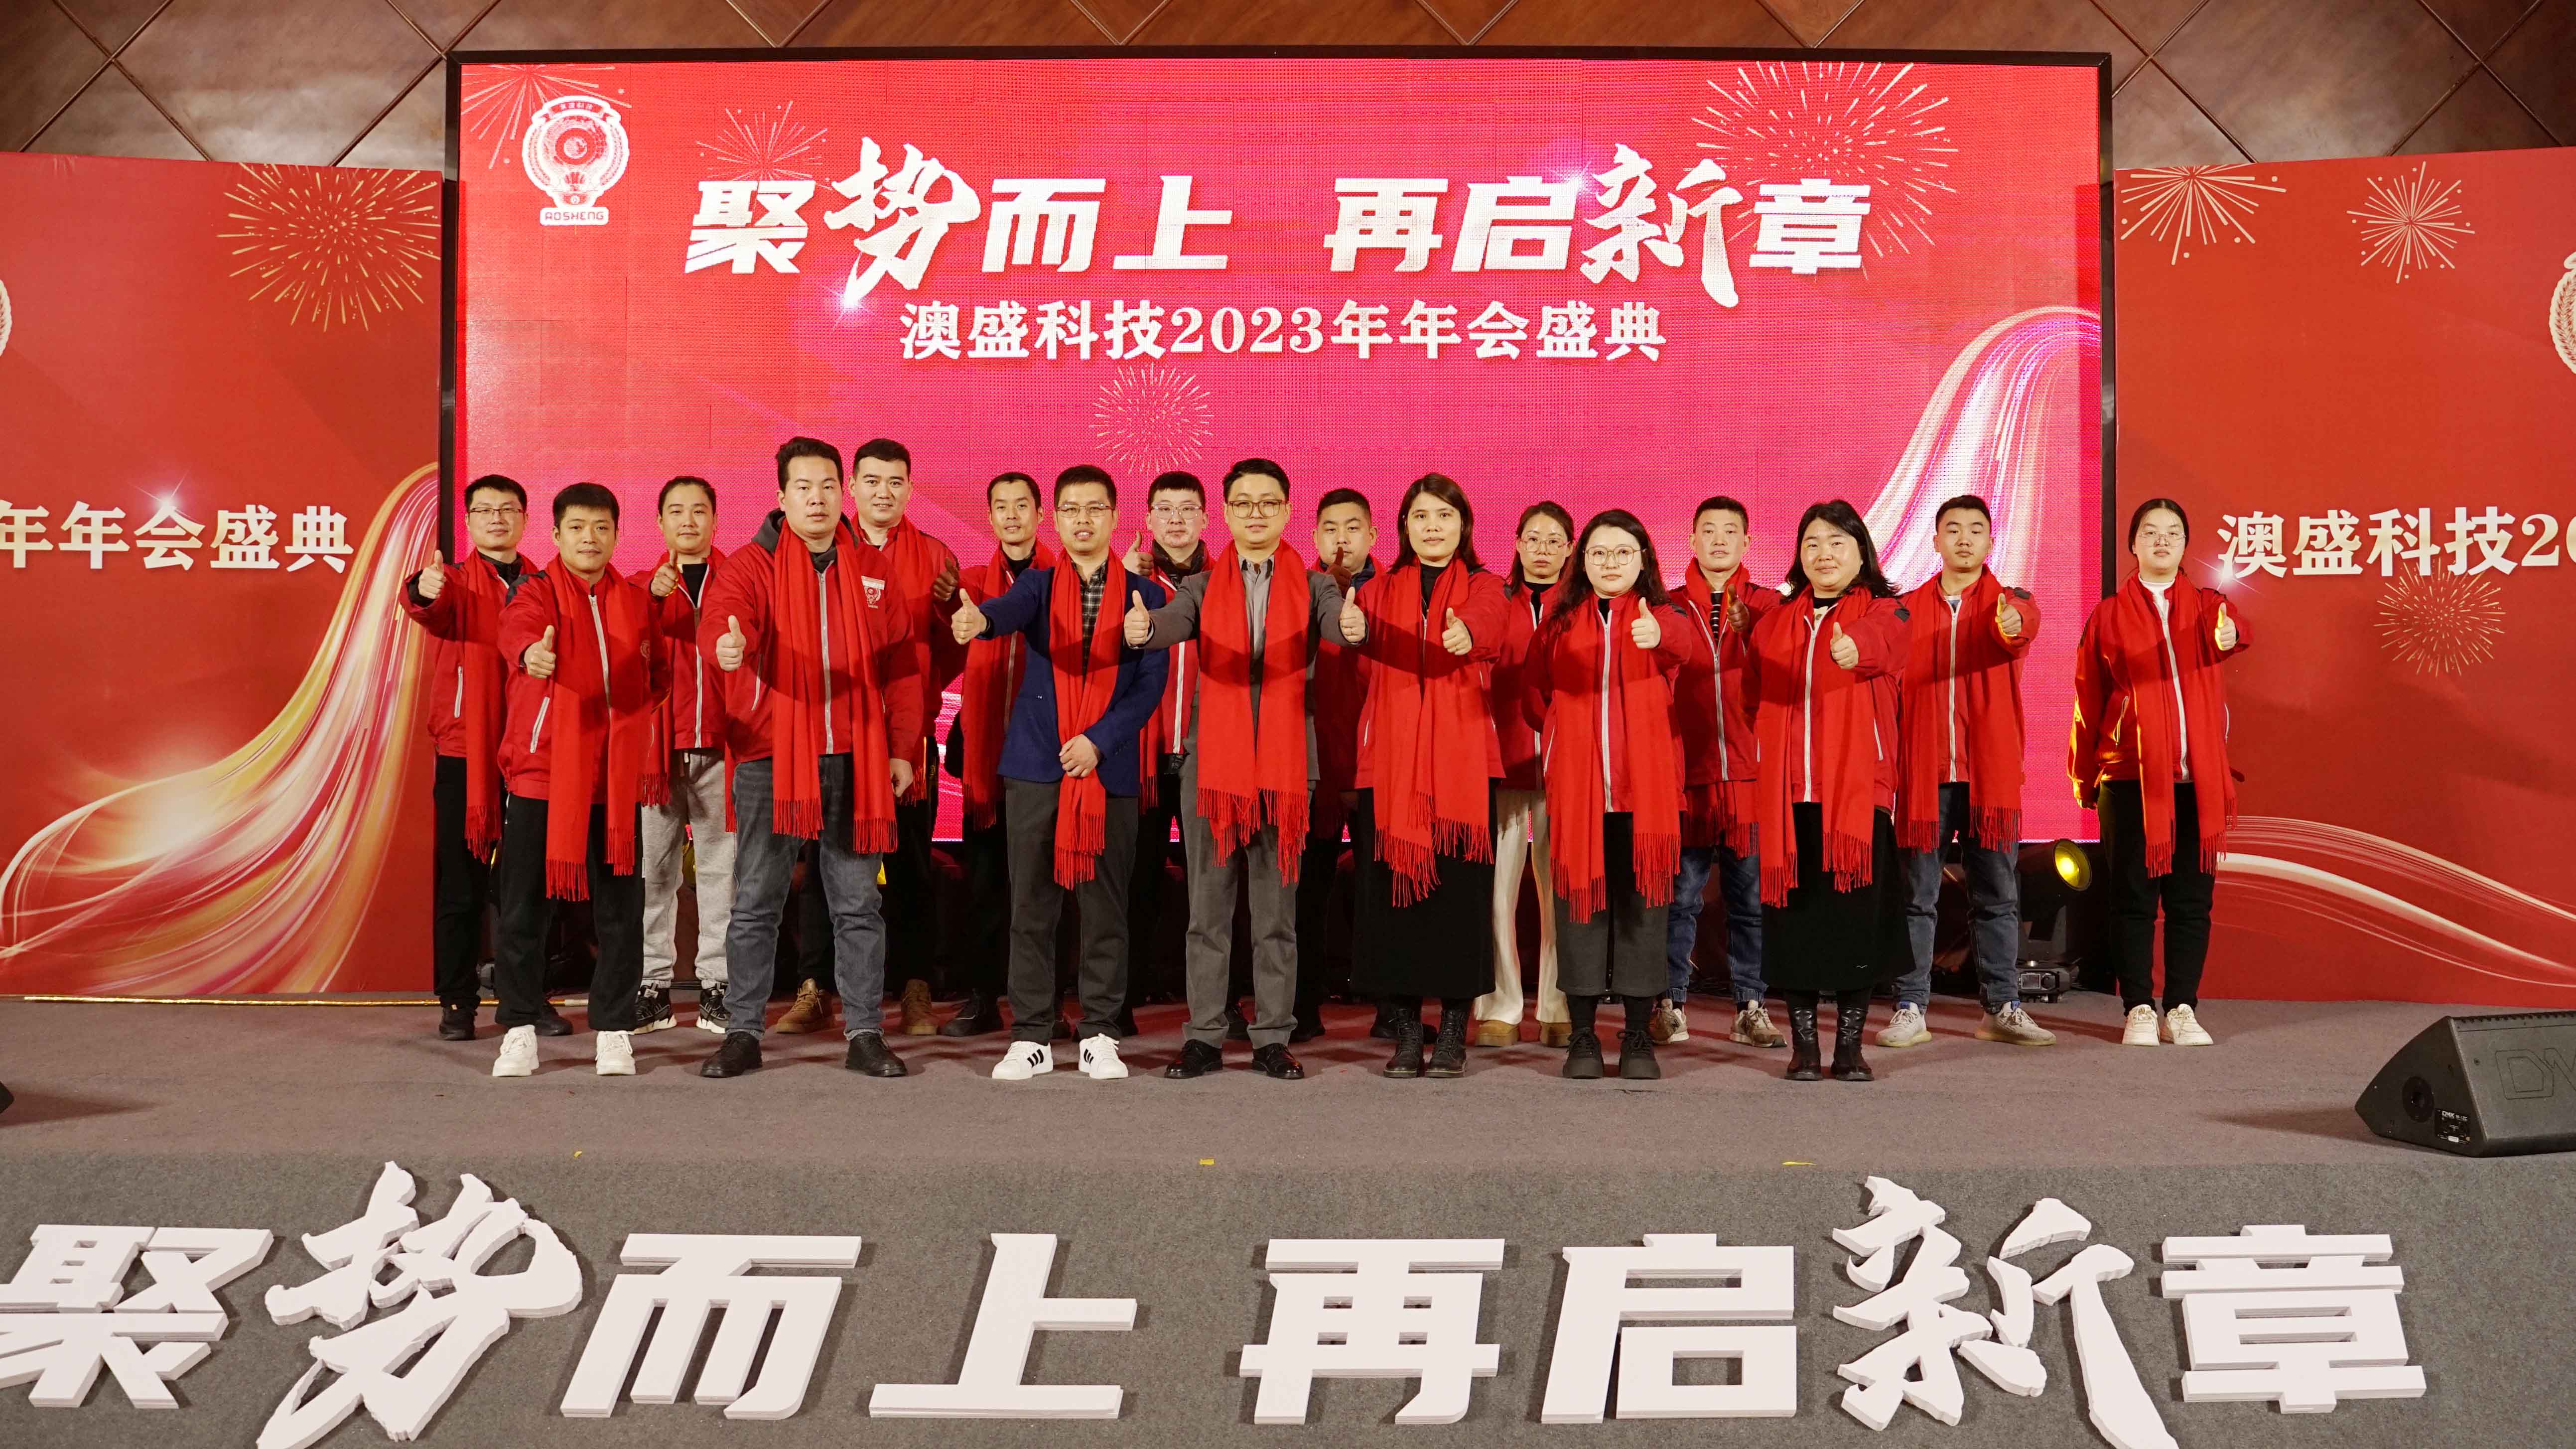 AoSheng Hi-Tech 2023 annual ceremony was held